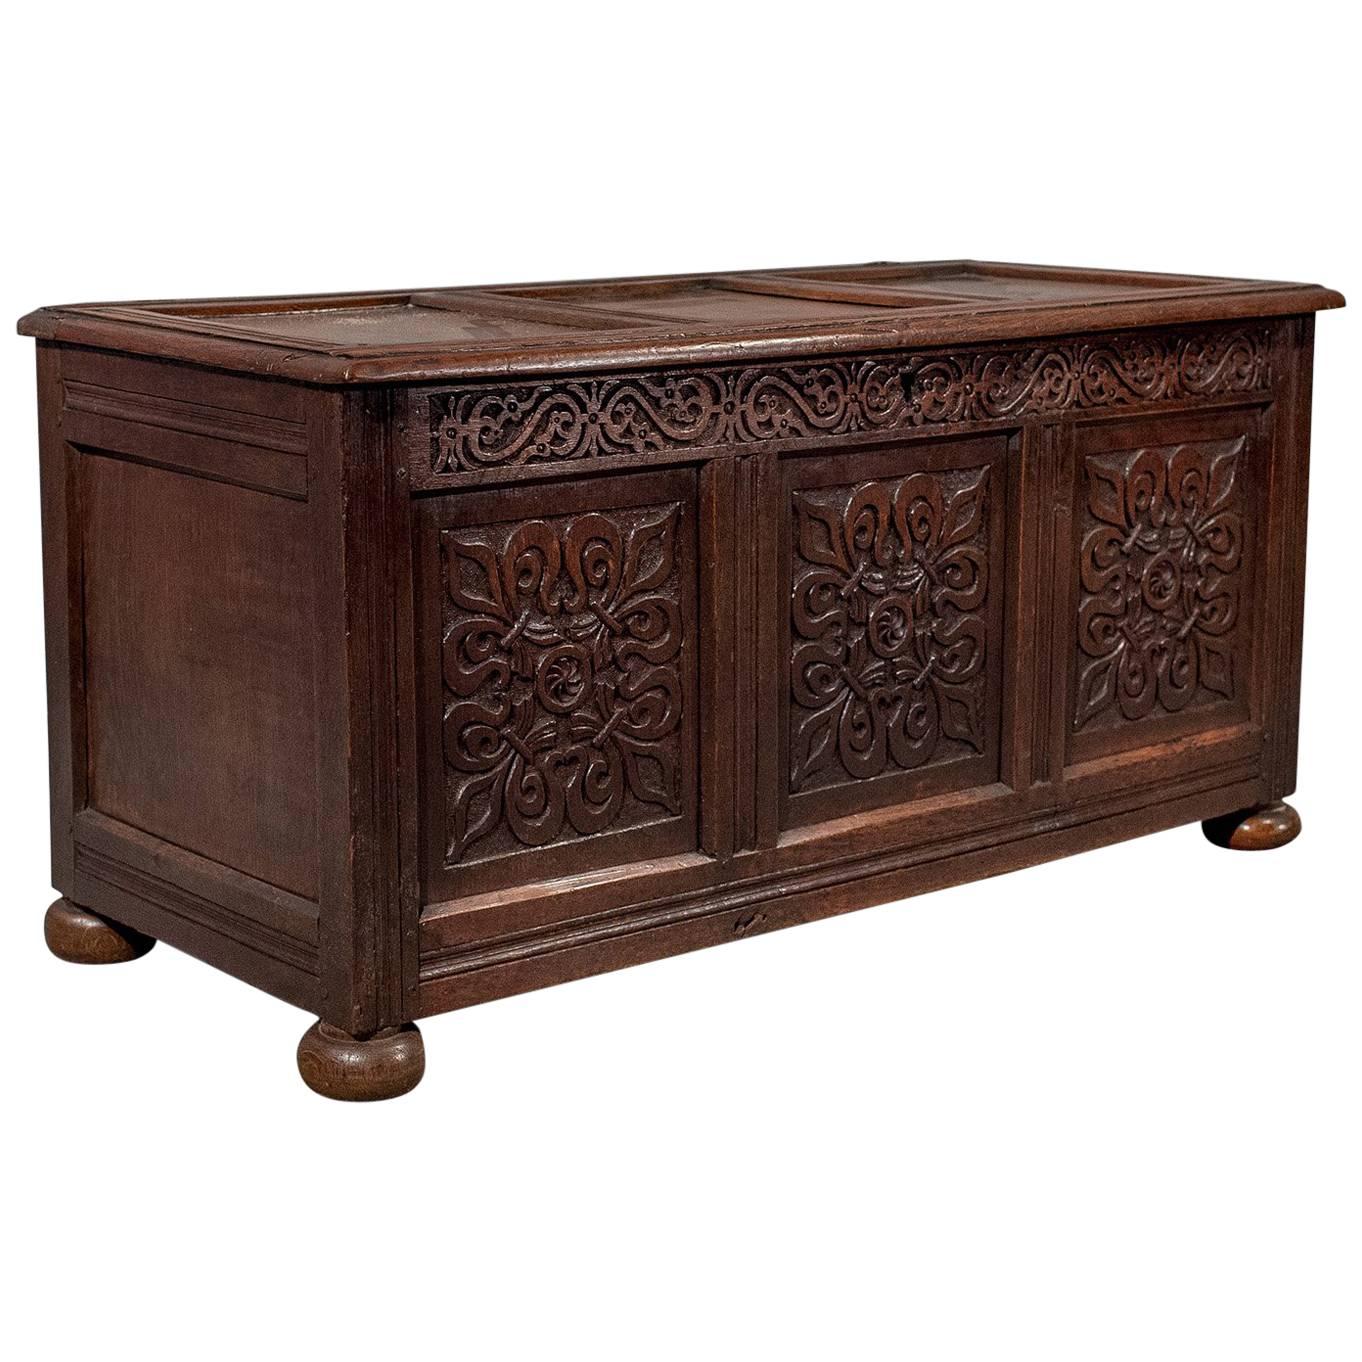 Antique Coffer, English Oak Joined Chest, Queen Anne, circa 1700